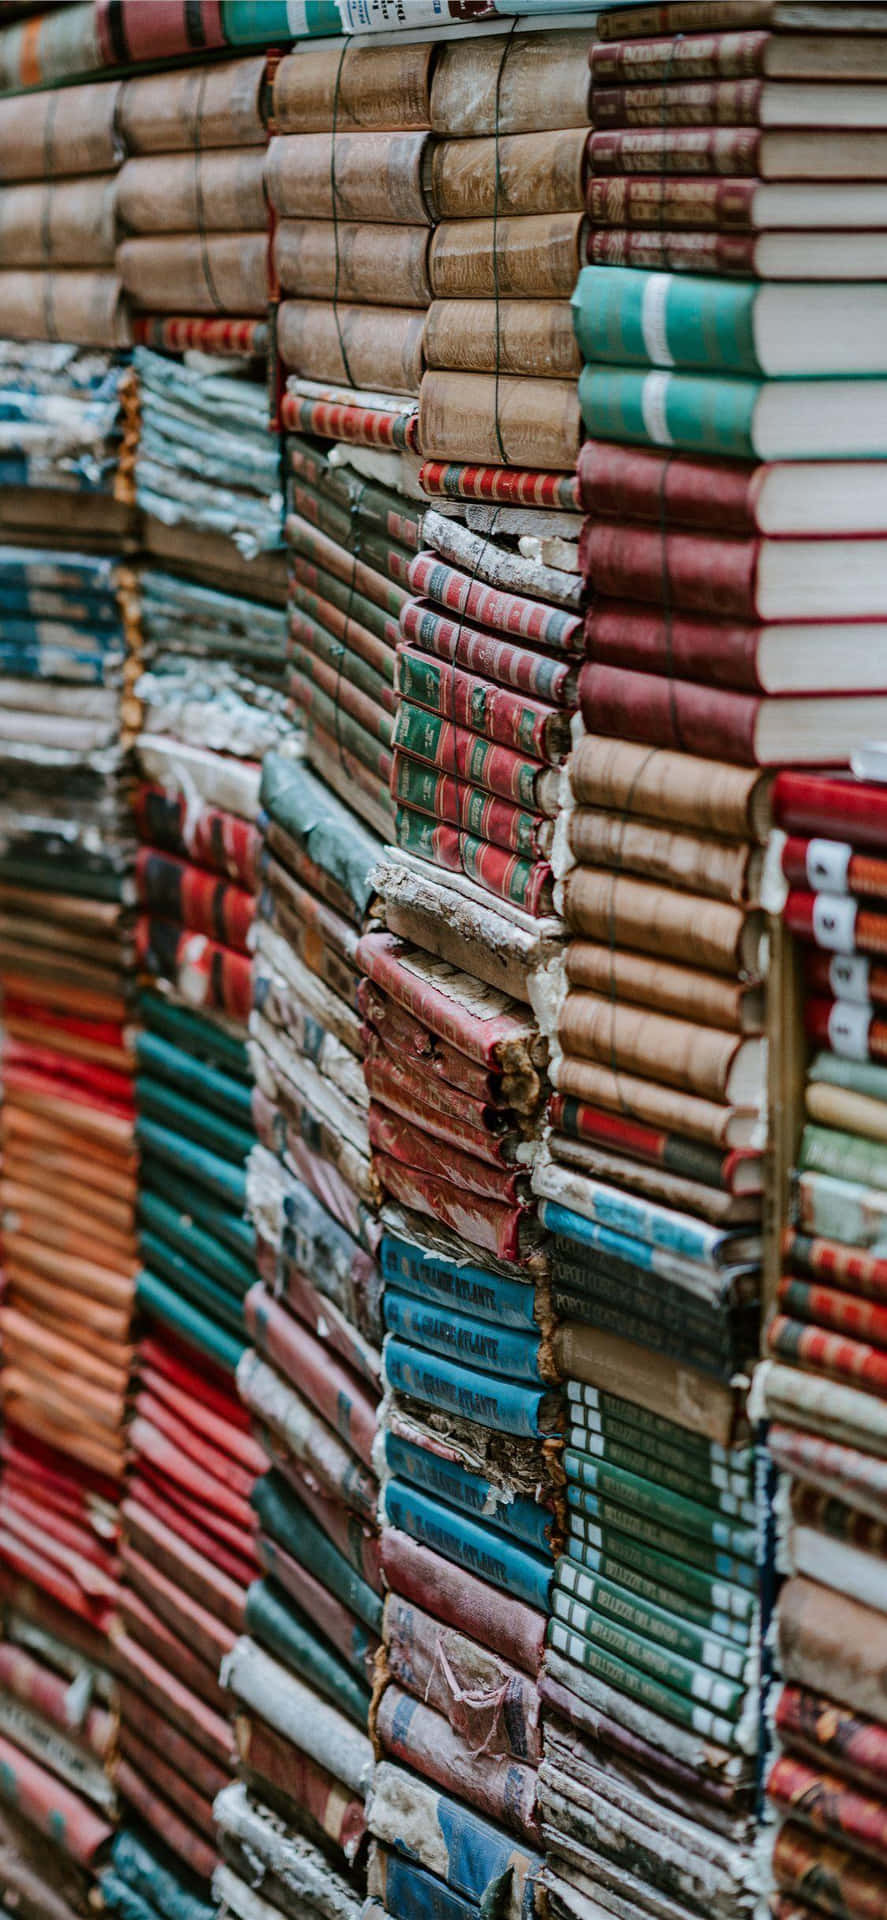 Explore New Ideas With A Books Iphone Wallpaper